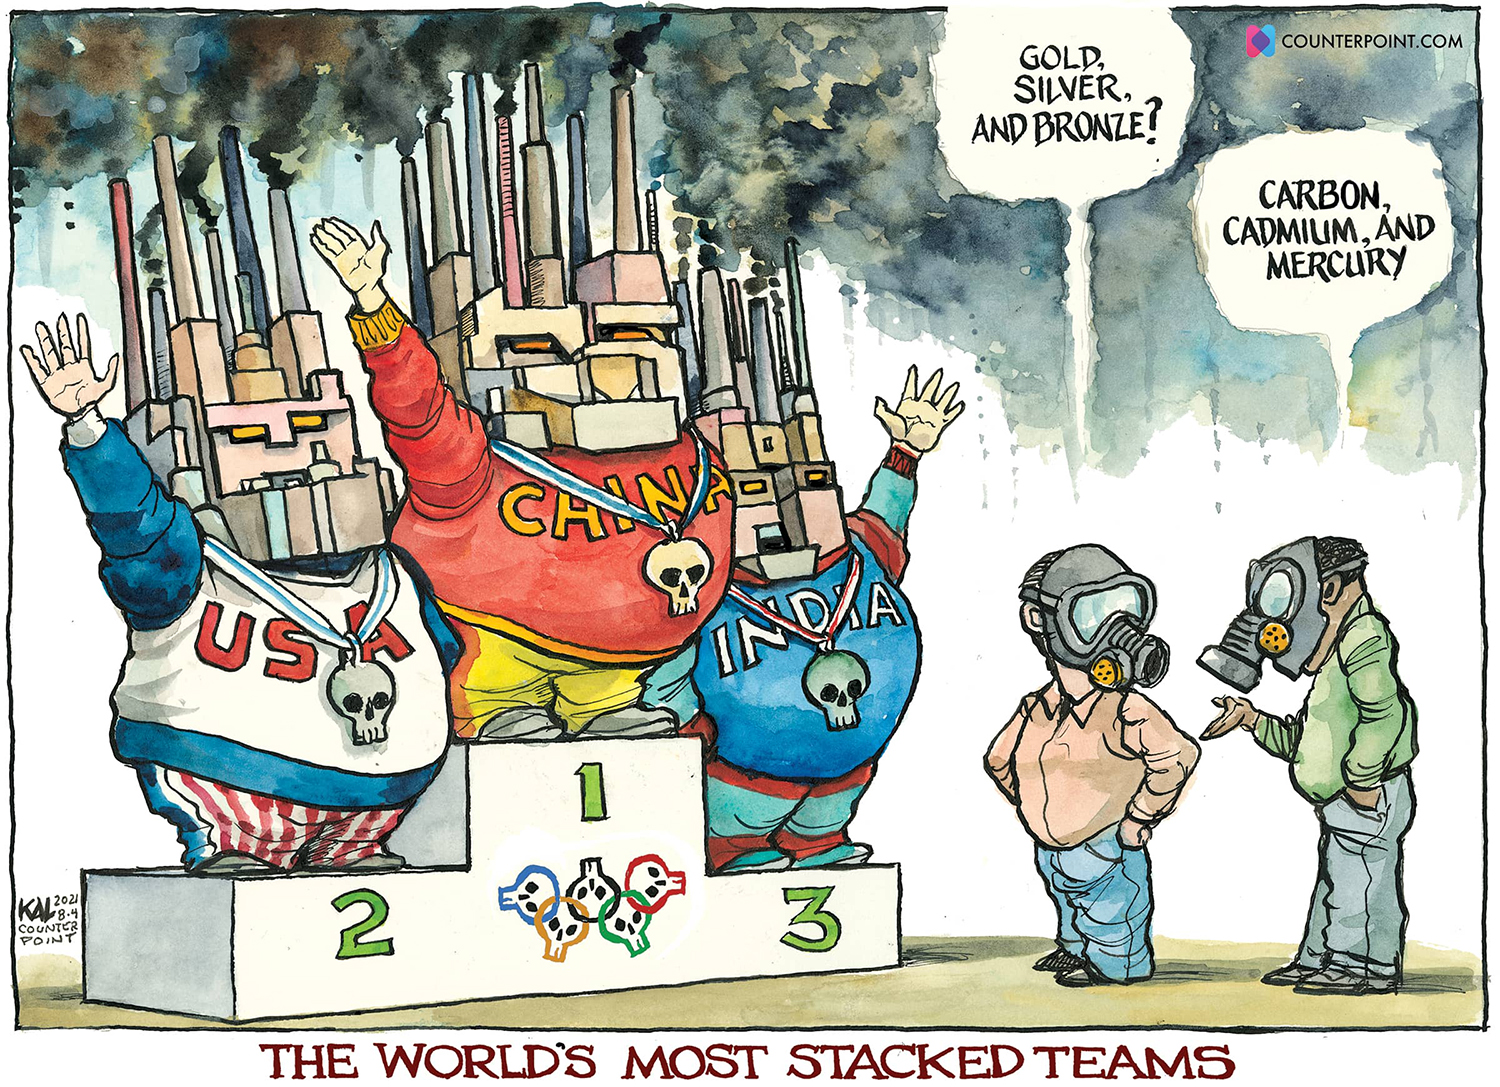 The Olympics of Pollution